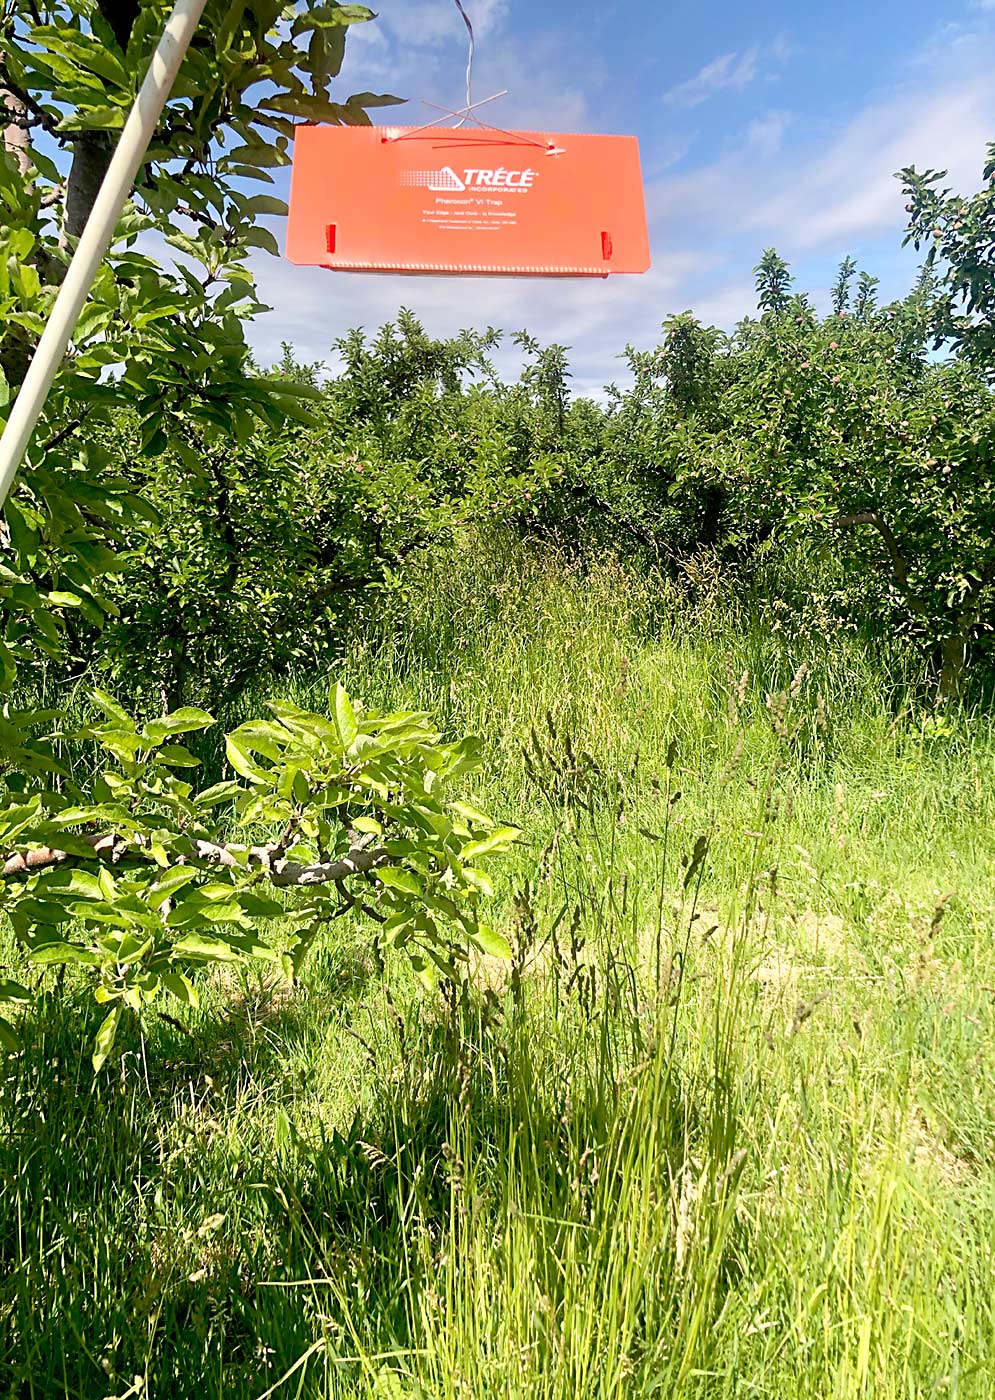 An orange delta trap baited with a new, non-pheromone codling moth lure hangs in an organic orchard with significant weed growth in 2021. The 4K lure offers growers a new tool to track codling moth density and population dynamics in mating-disrupted orchards, but studies in 2021 found that the presence of dense weeds can reduce its effectiveness, likely due to competing plant volatiles. (Courtesy Alan Knight)